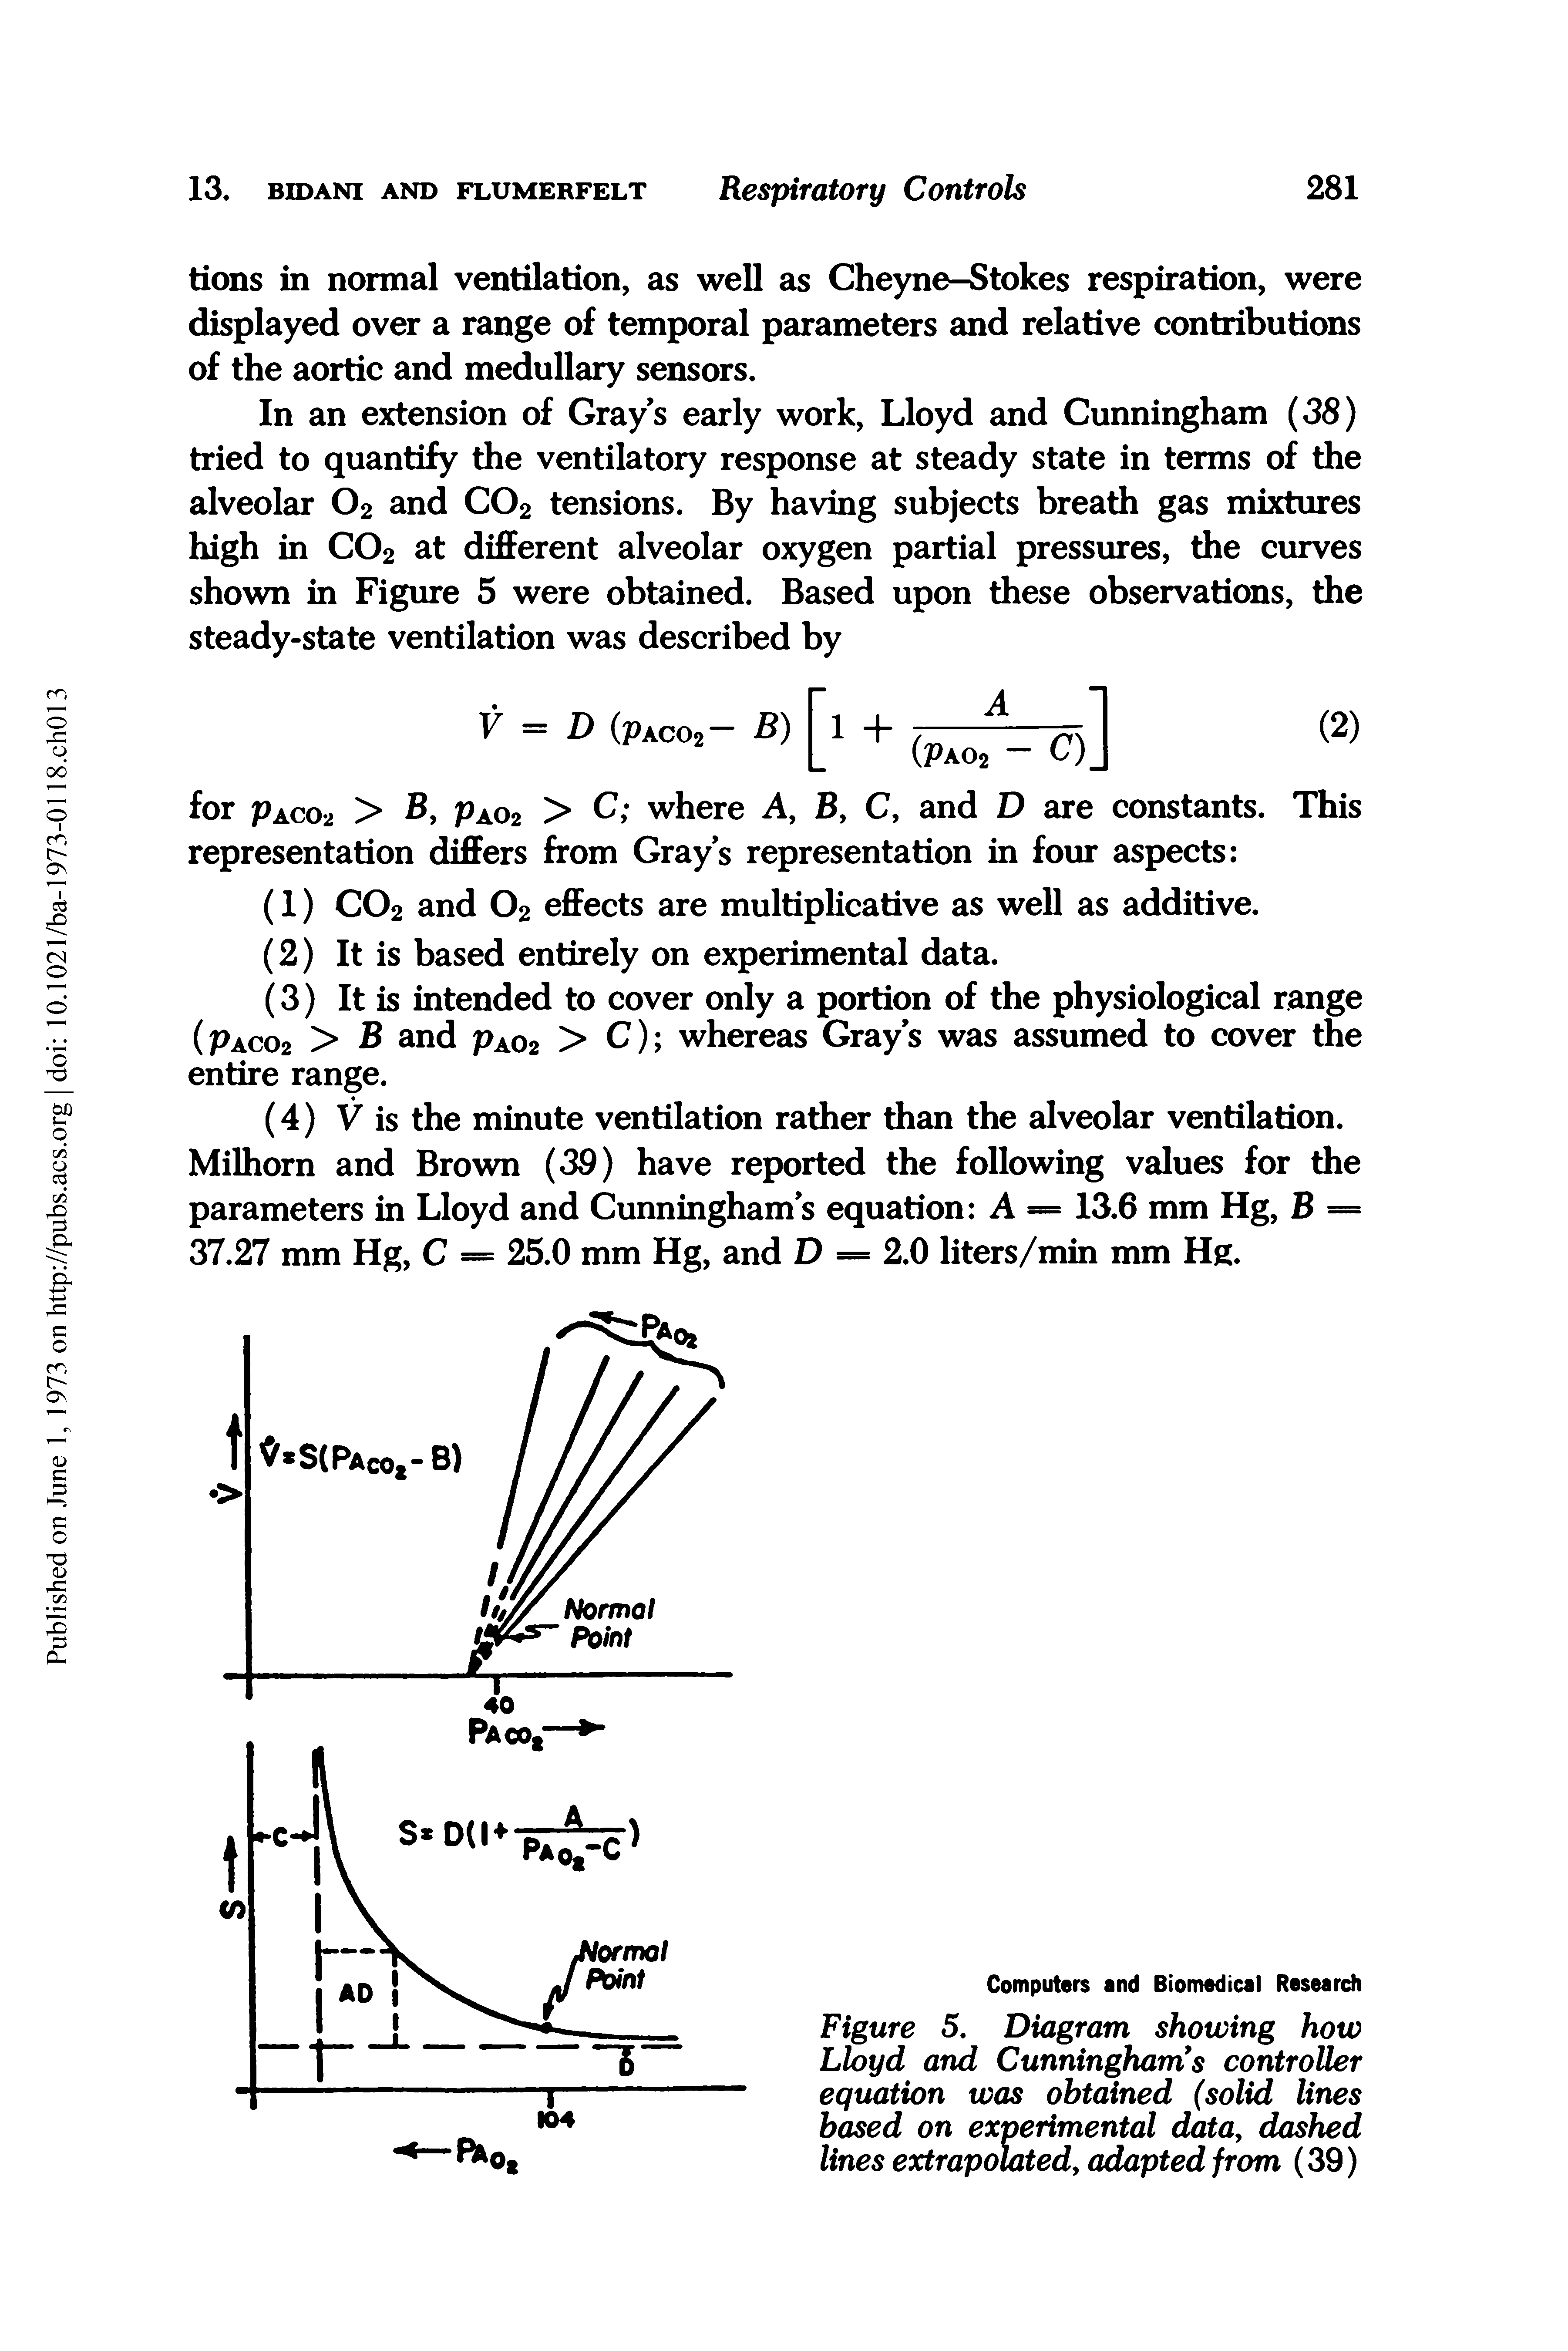 Figure 5. Diagram showing how Lloyd and Cunningham s controller equation was obtained (solid lines based on experimental data, dashed lines extrapolated, adapted from (39)...